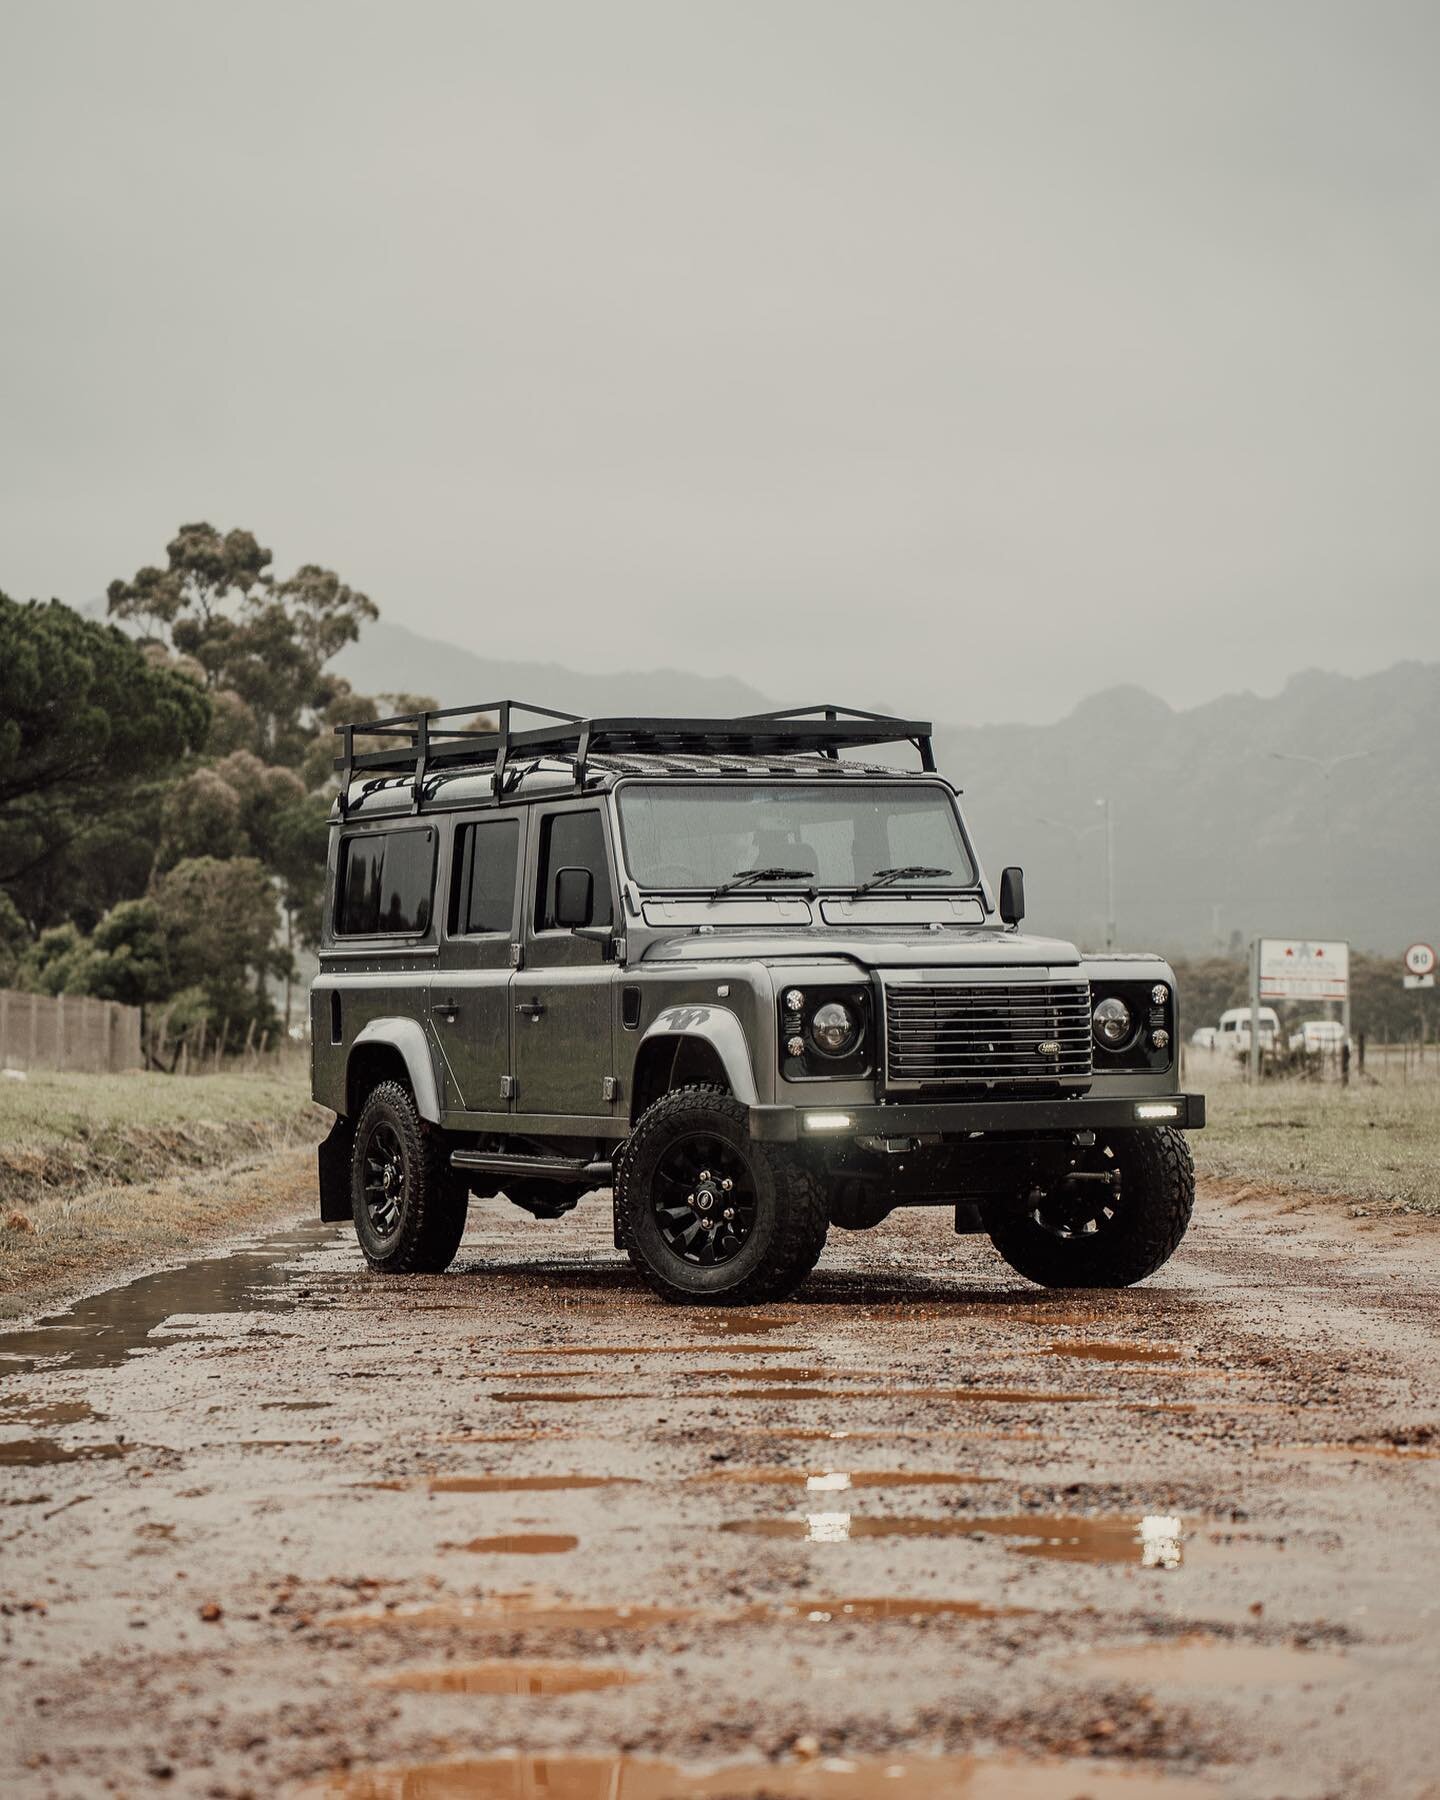 This #defender110 is ready for anything you throw at it. #ponsteyn4x4 #defender